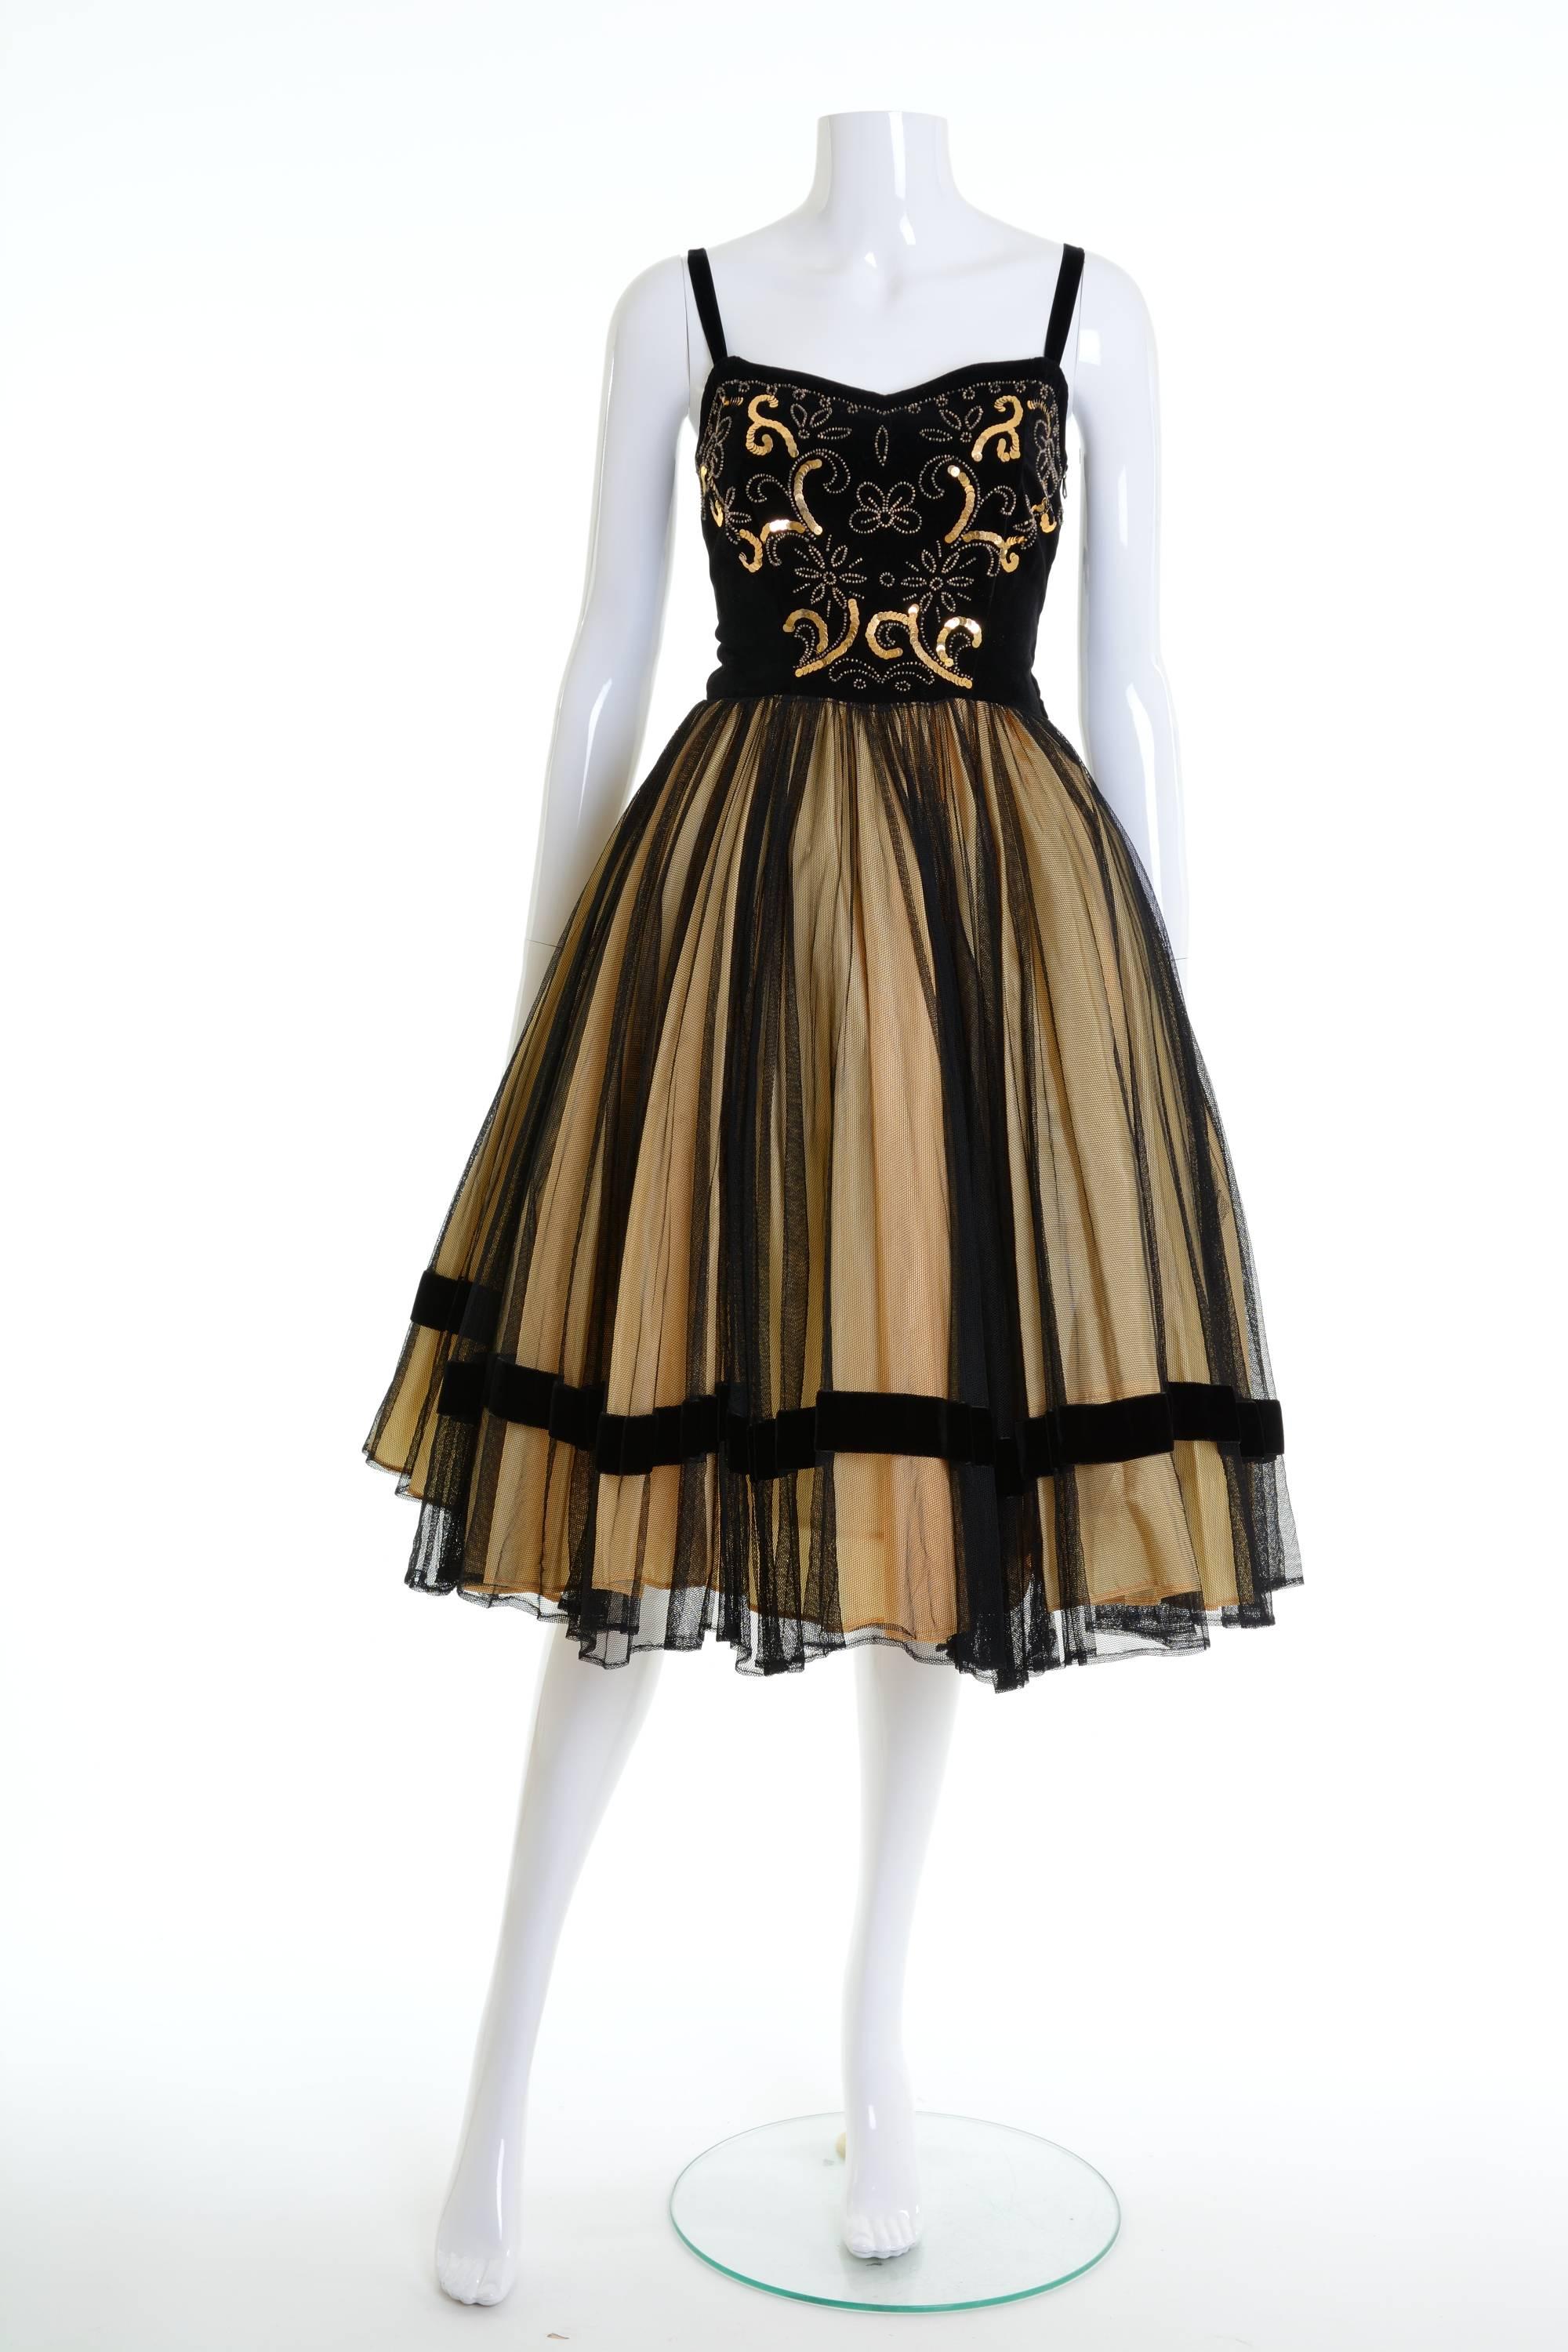 This gorgeous 1950s dress is in a black velvet and tulle fabric with amazing golden sequins and beadeds embroidered. It has a full circle skirt and side zip closure. It's fully lined. 

Good vintage condition
 
Label: N/A
Fabric: silk/nylon
Color: